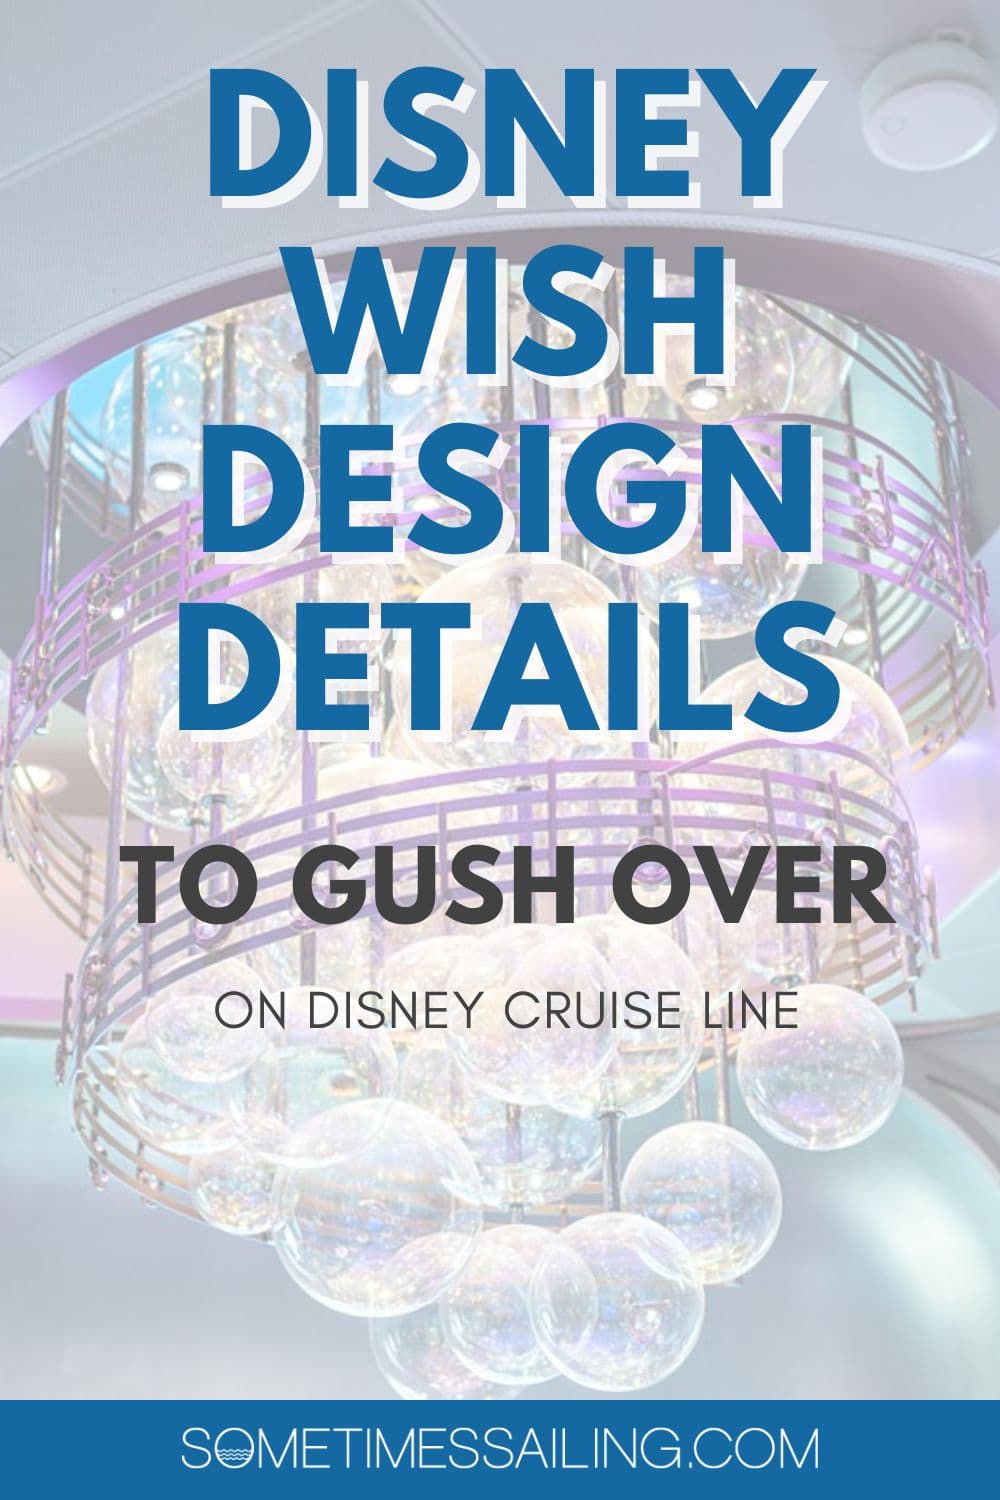 Disney Wish design details to gush over on Disney Cruise Line with a photo of the piano bar bubble chandelier behind it.